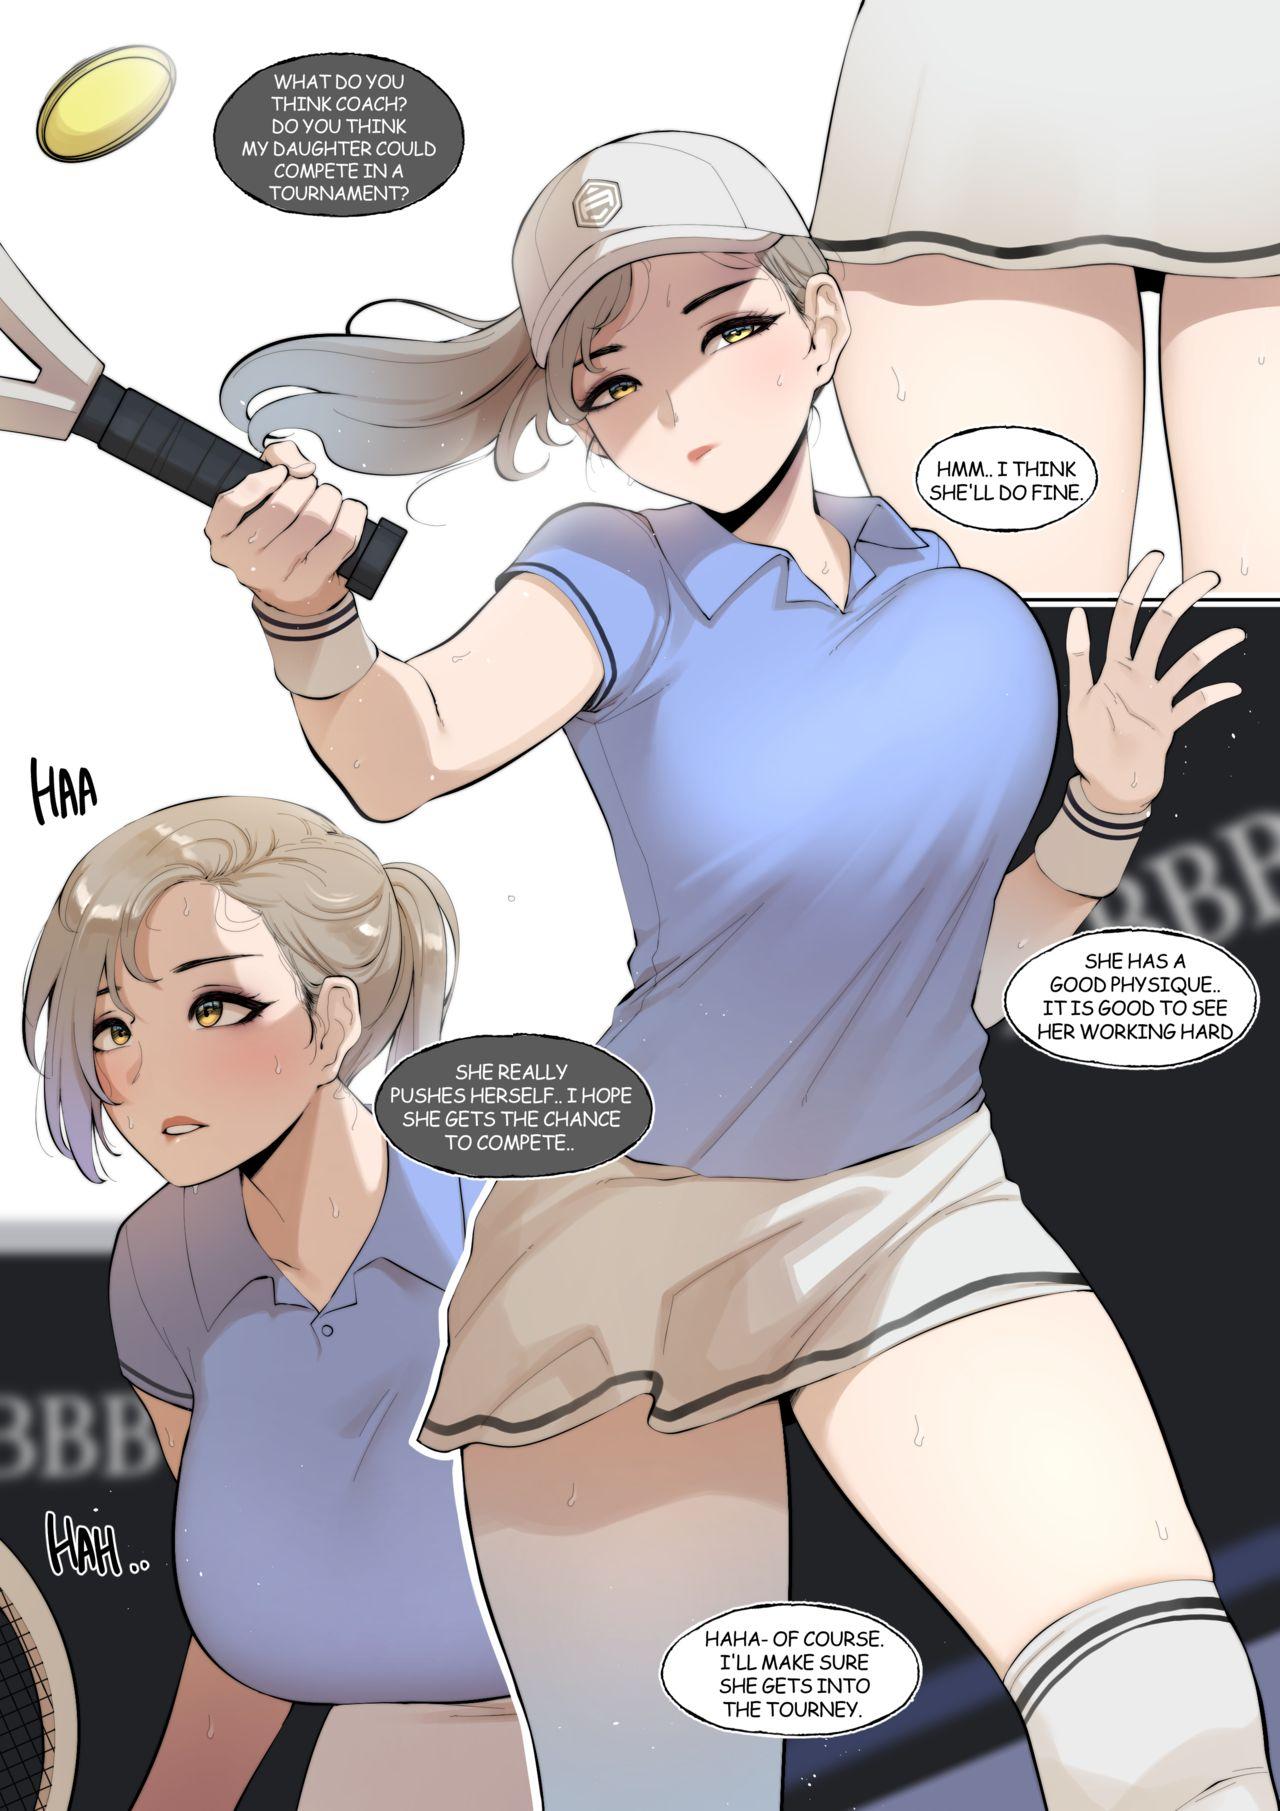 Asstomouth It's Normal for us to Have Sex if You Lose Right? Tennis edition - Original Dykes - Picture 2